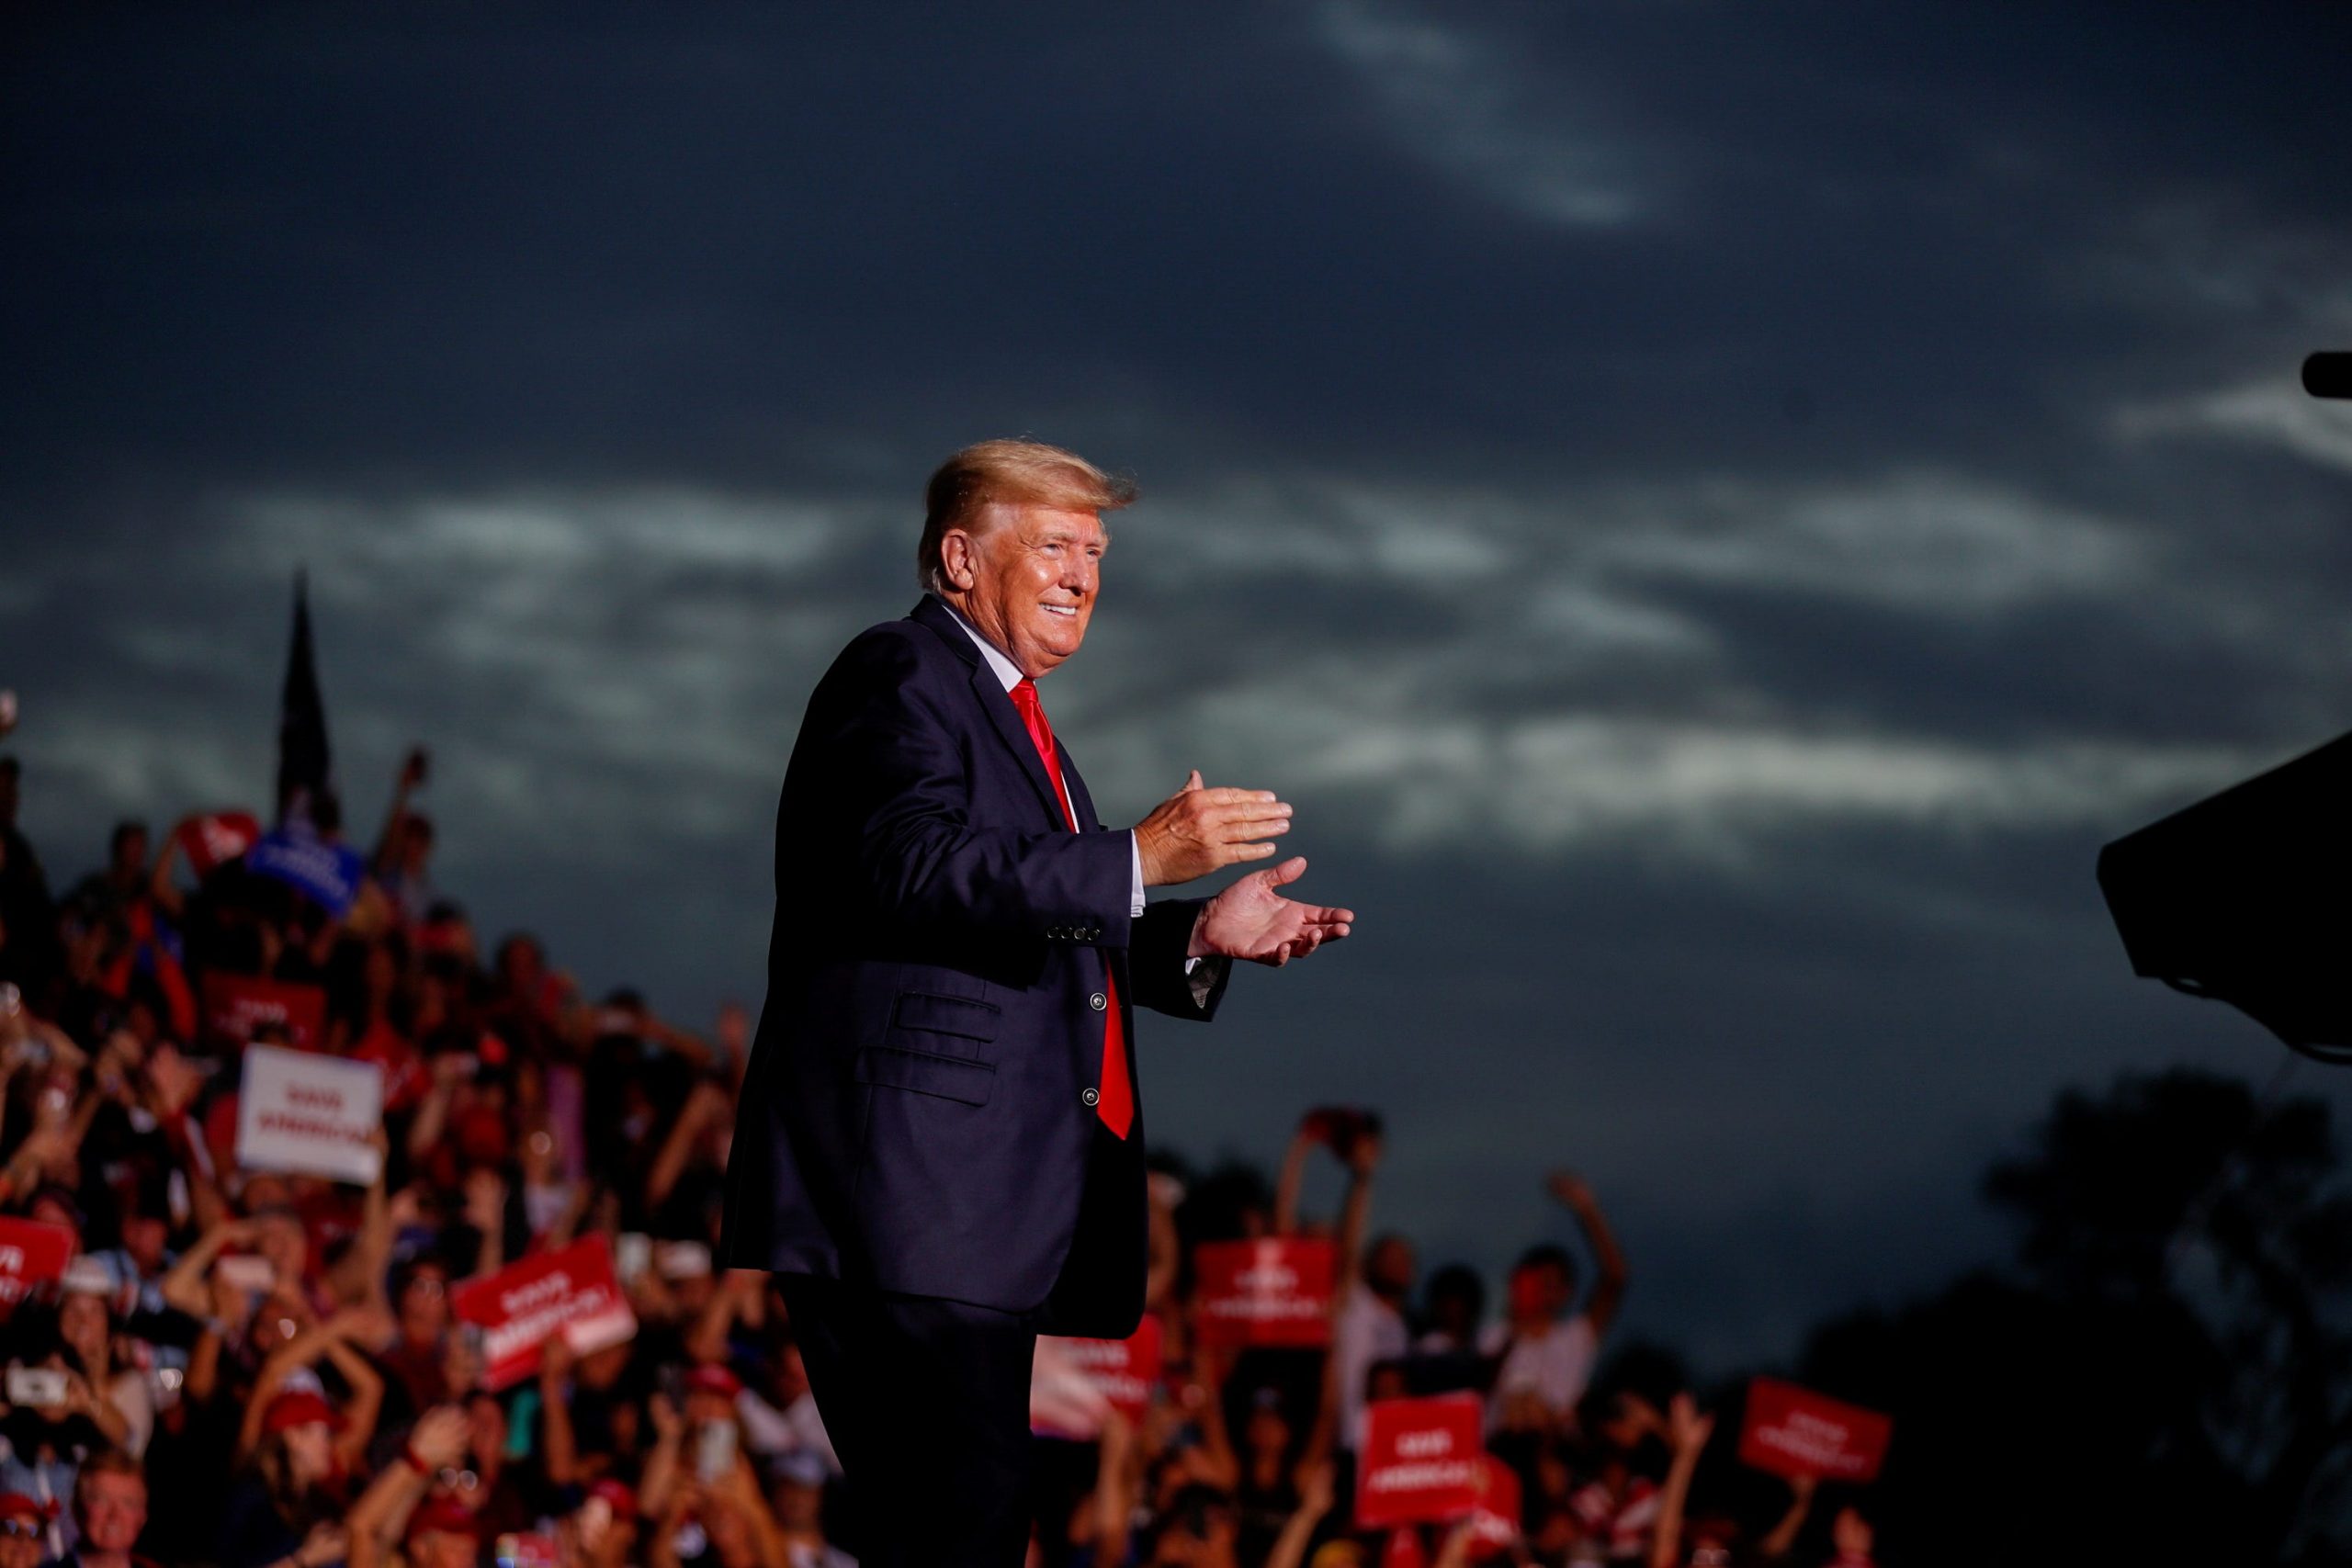 Former President Donald Trump in a red tie and blue suit claps his hands in front of a crowd and a stormy sky